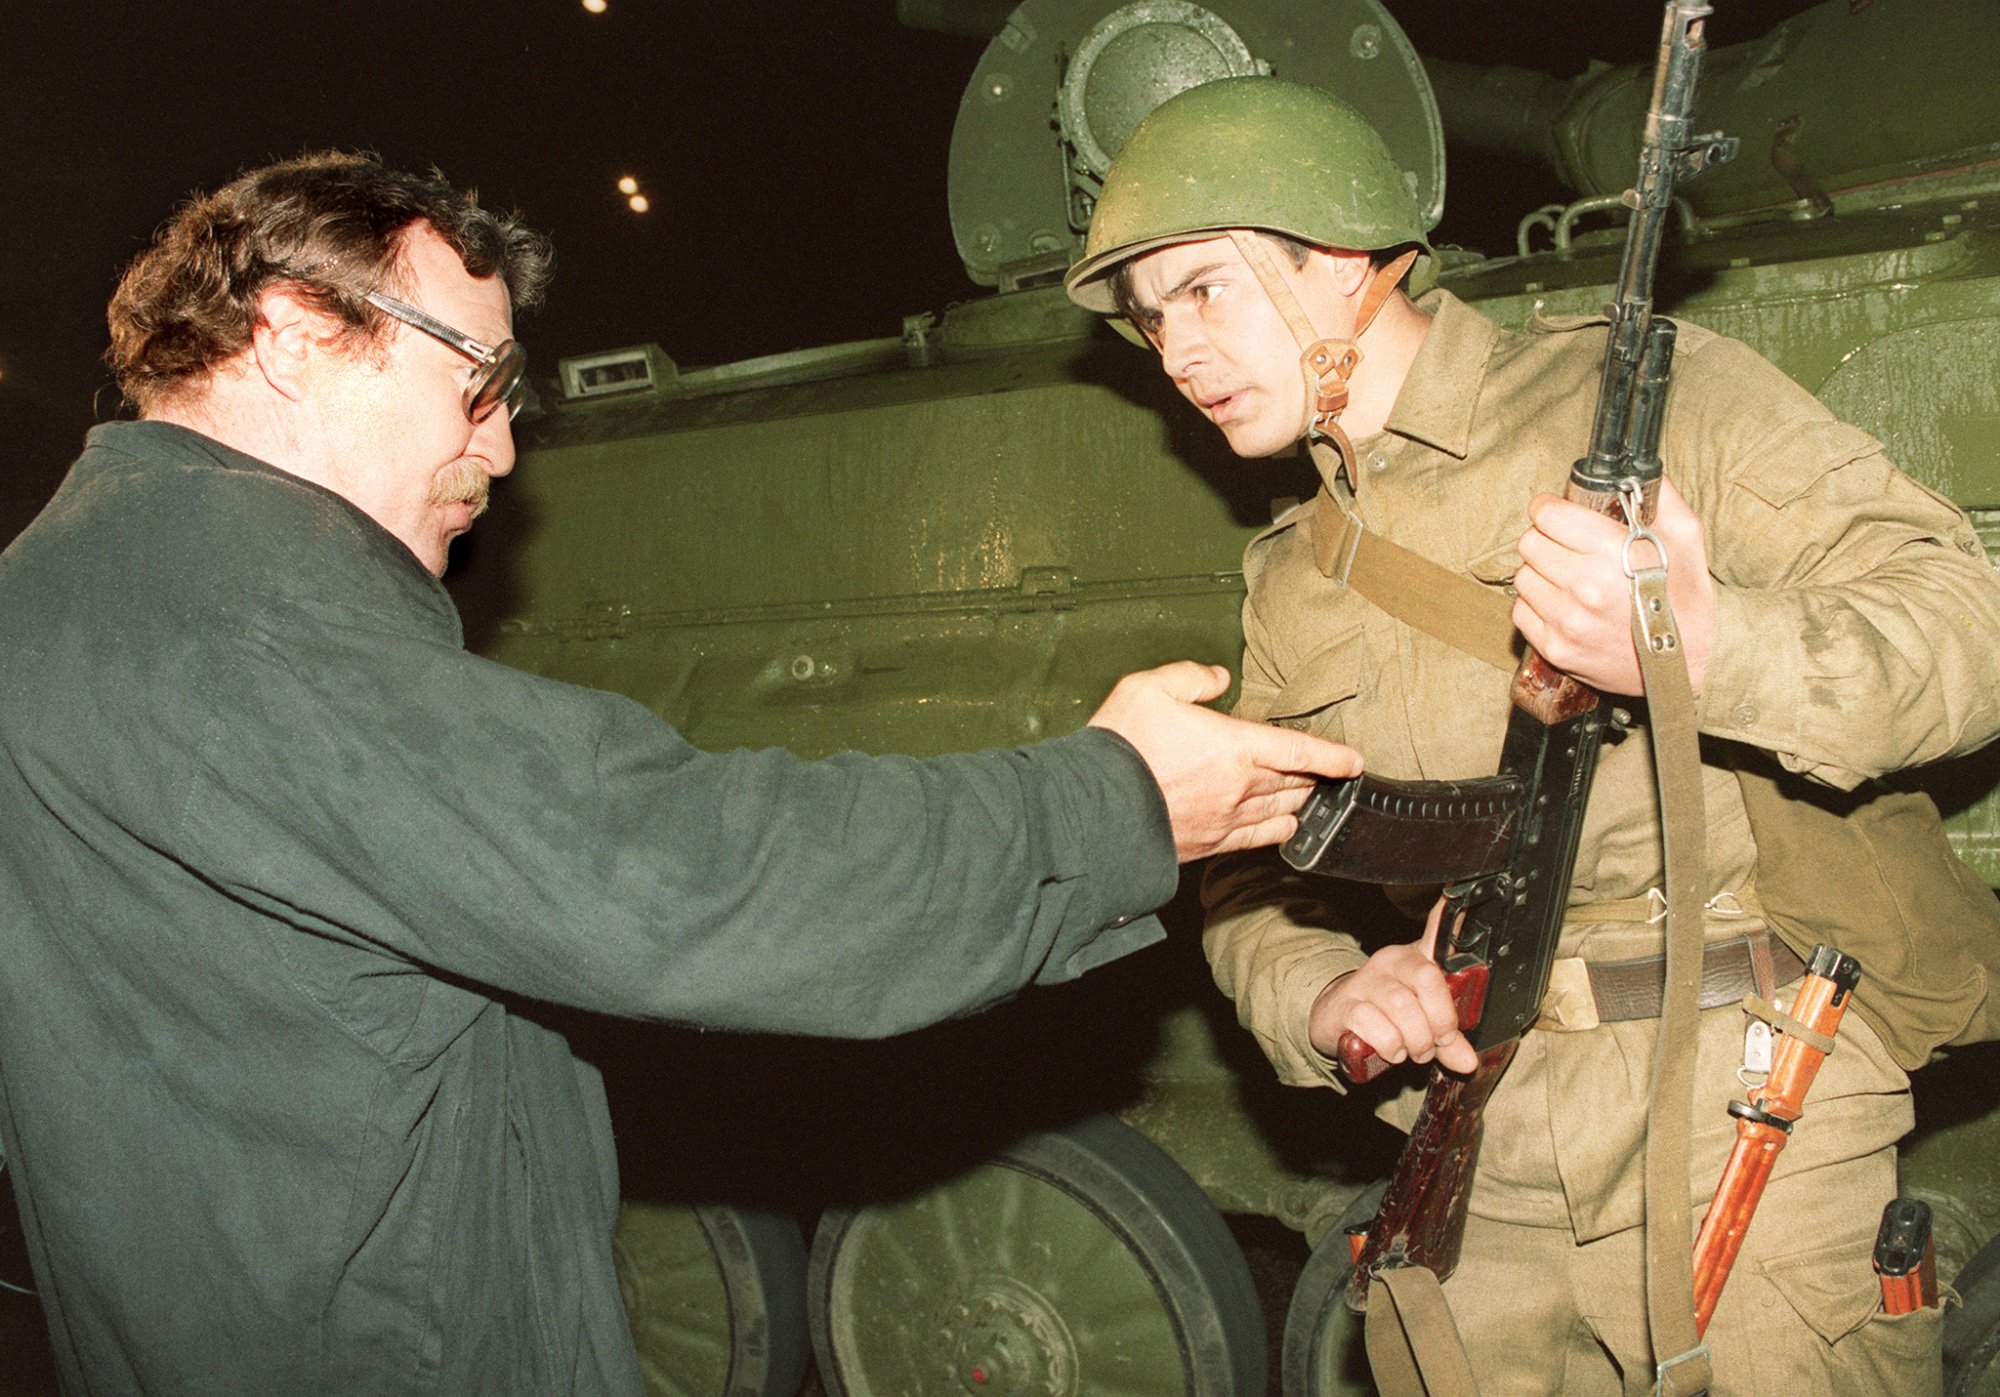 A pro-democracy demonstrator argues with a Soviet soldier late Aug. 20, 1991 as a tank block access to the center of Moscow.